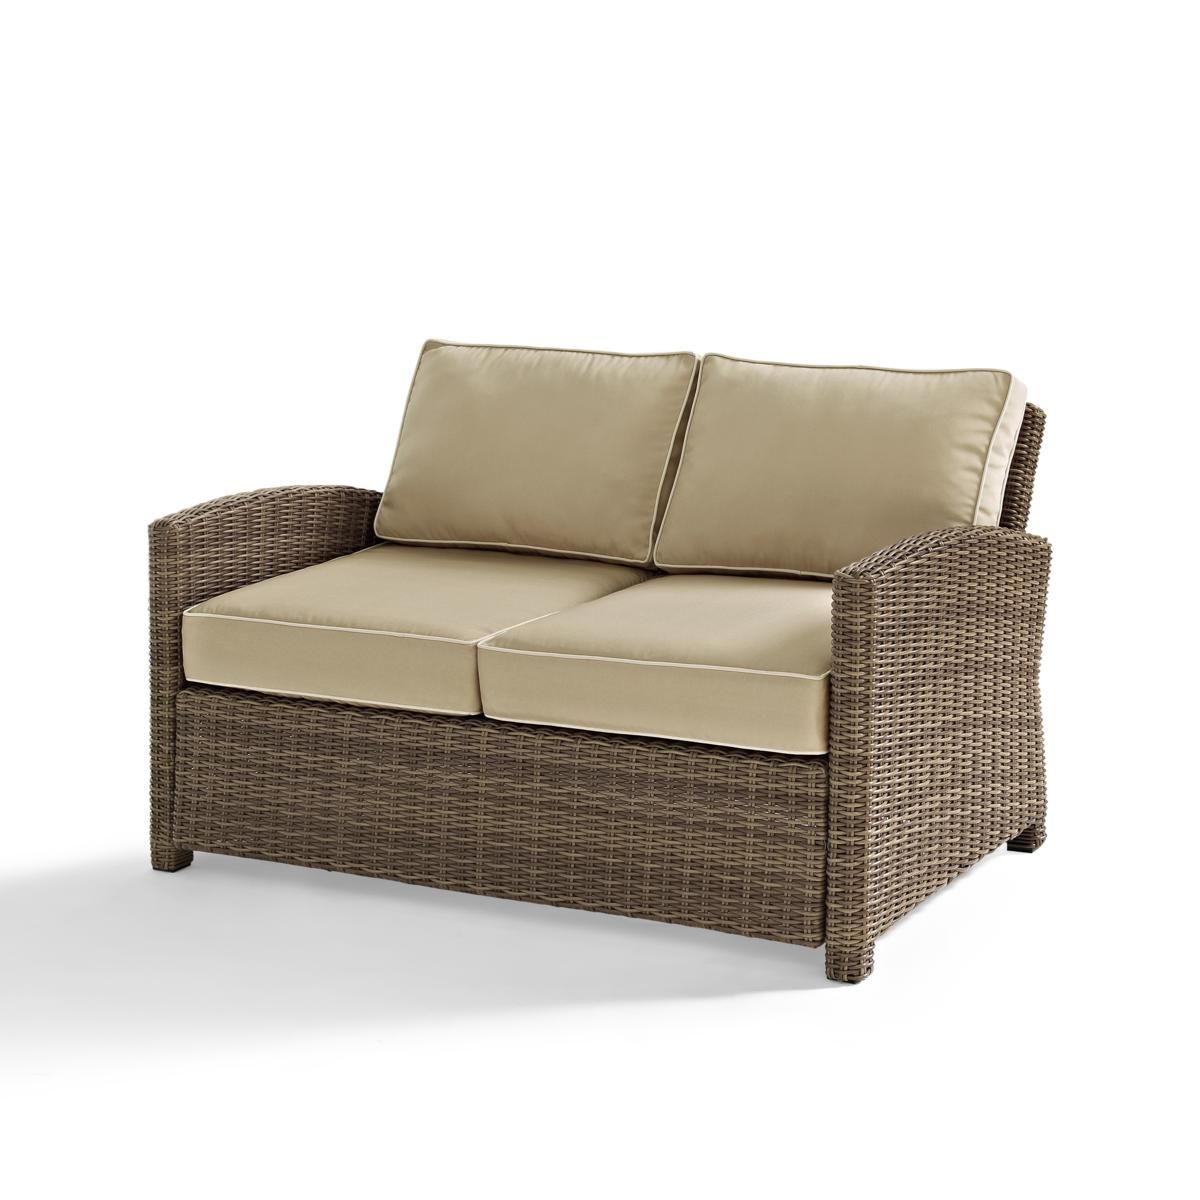 Outdoor Sand Cushions Loveseats Within 2017 Crosley Bradenton Outdoor Wicker Loveseat With Sand Cushions (View 14 of 15)